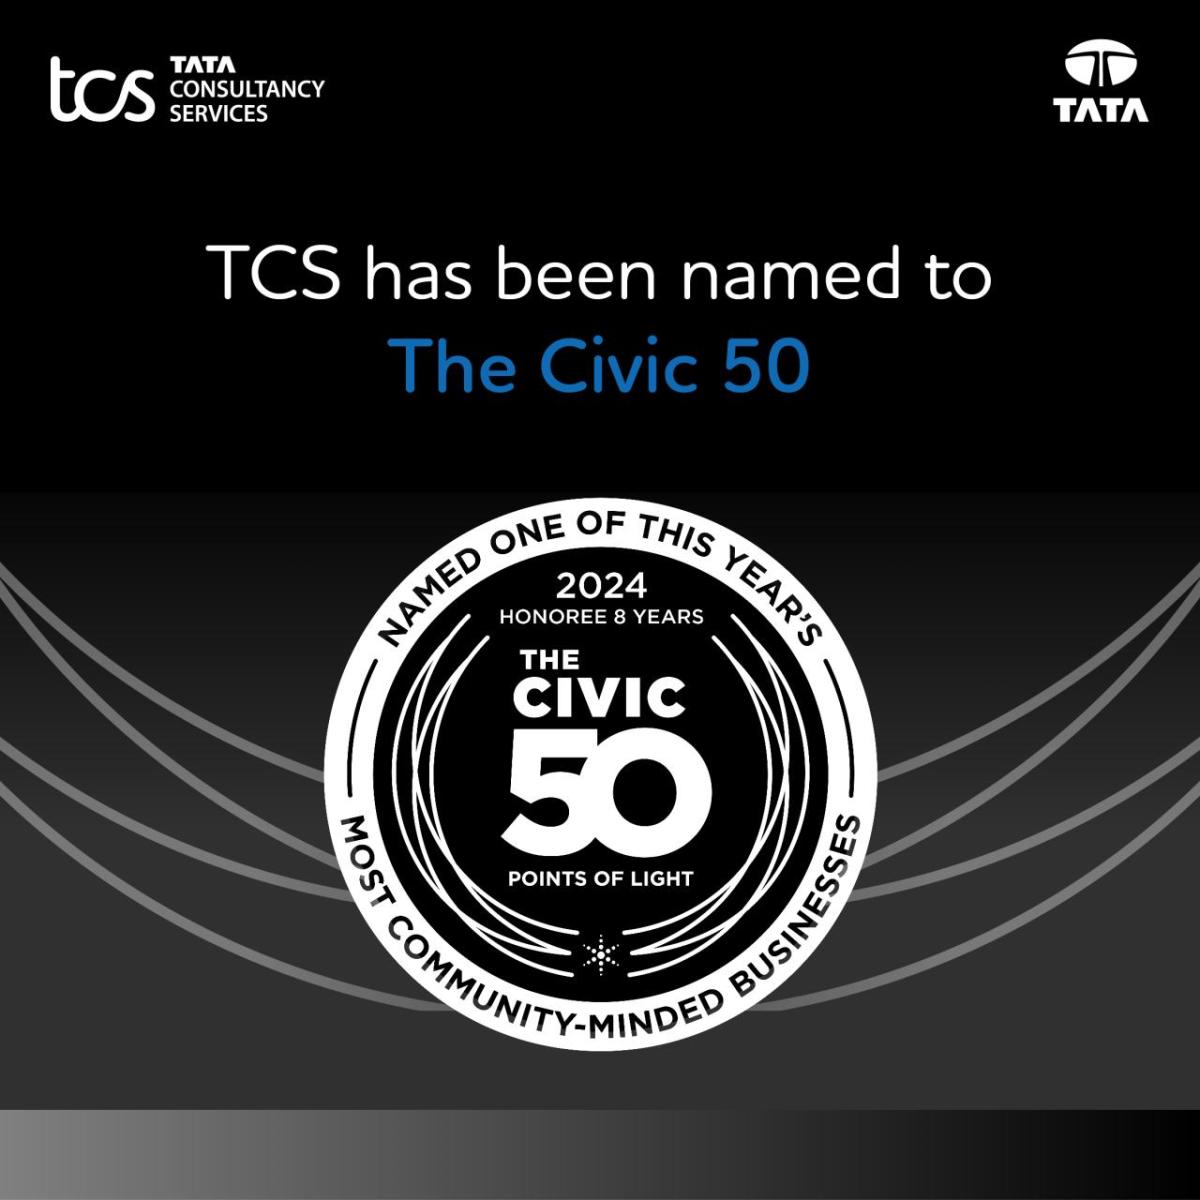 "TCS has been named to The Civic 50" with the award logo